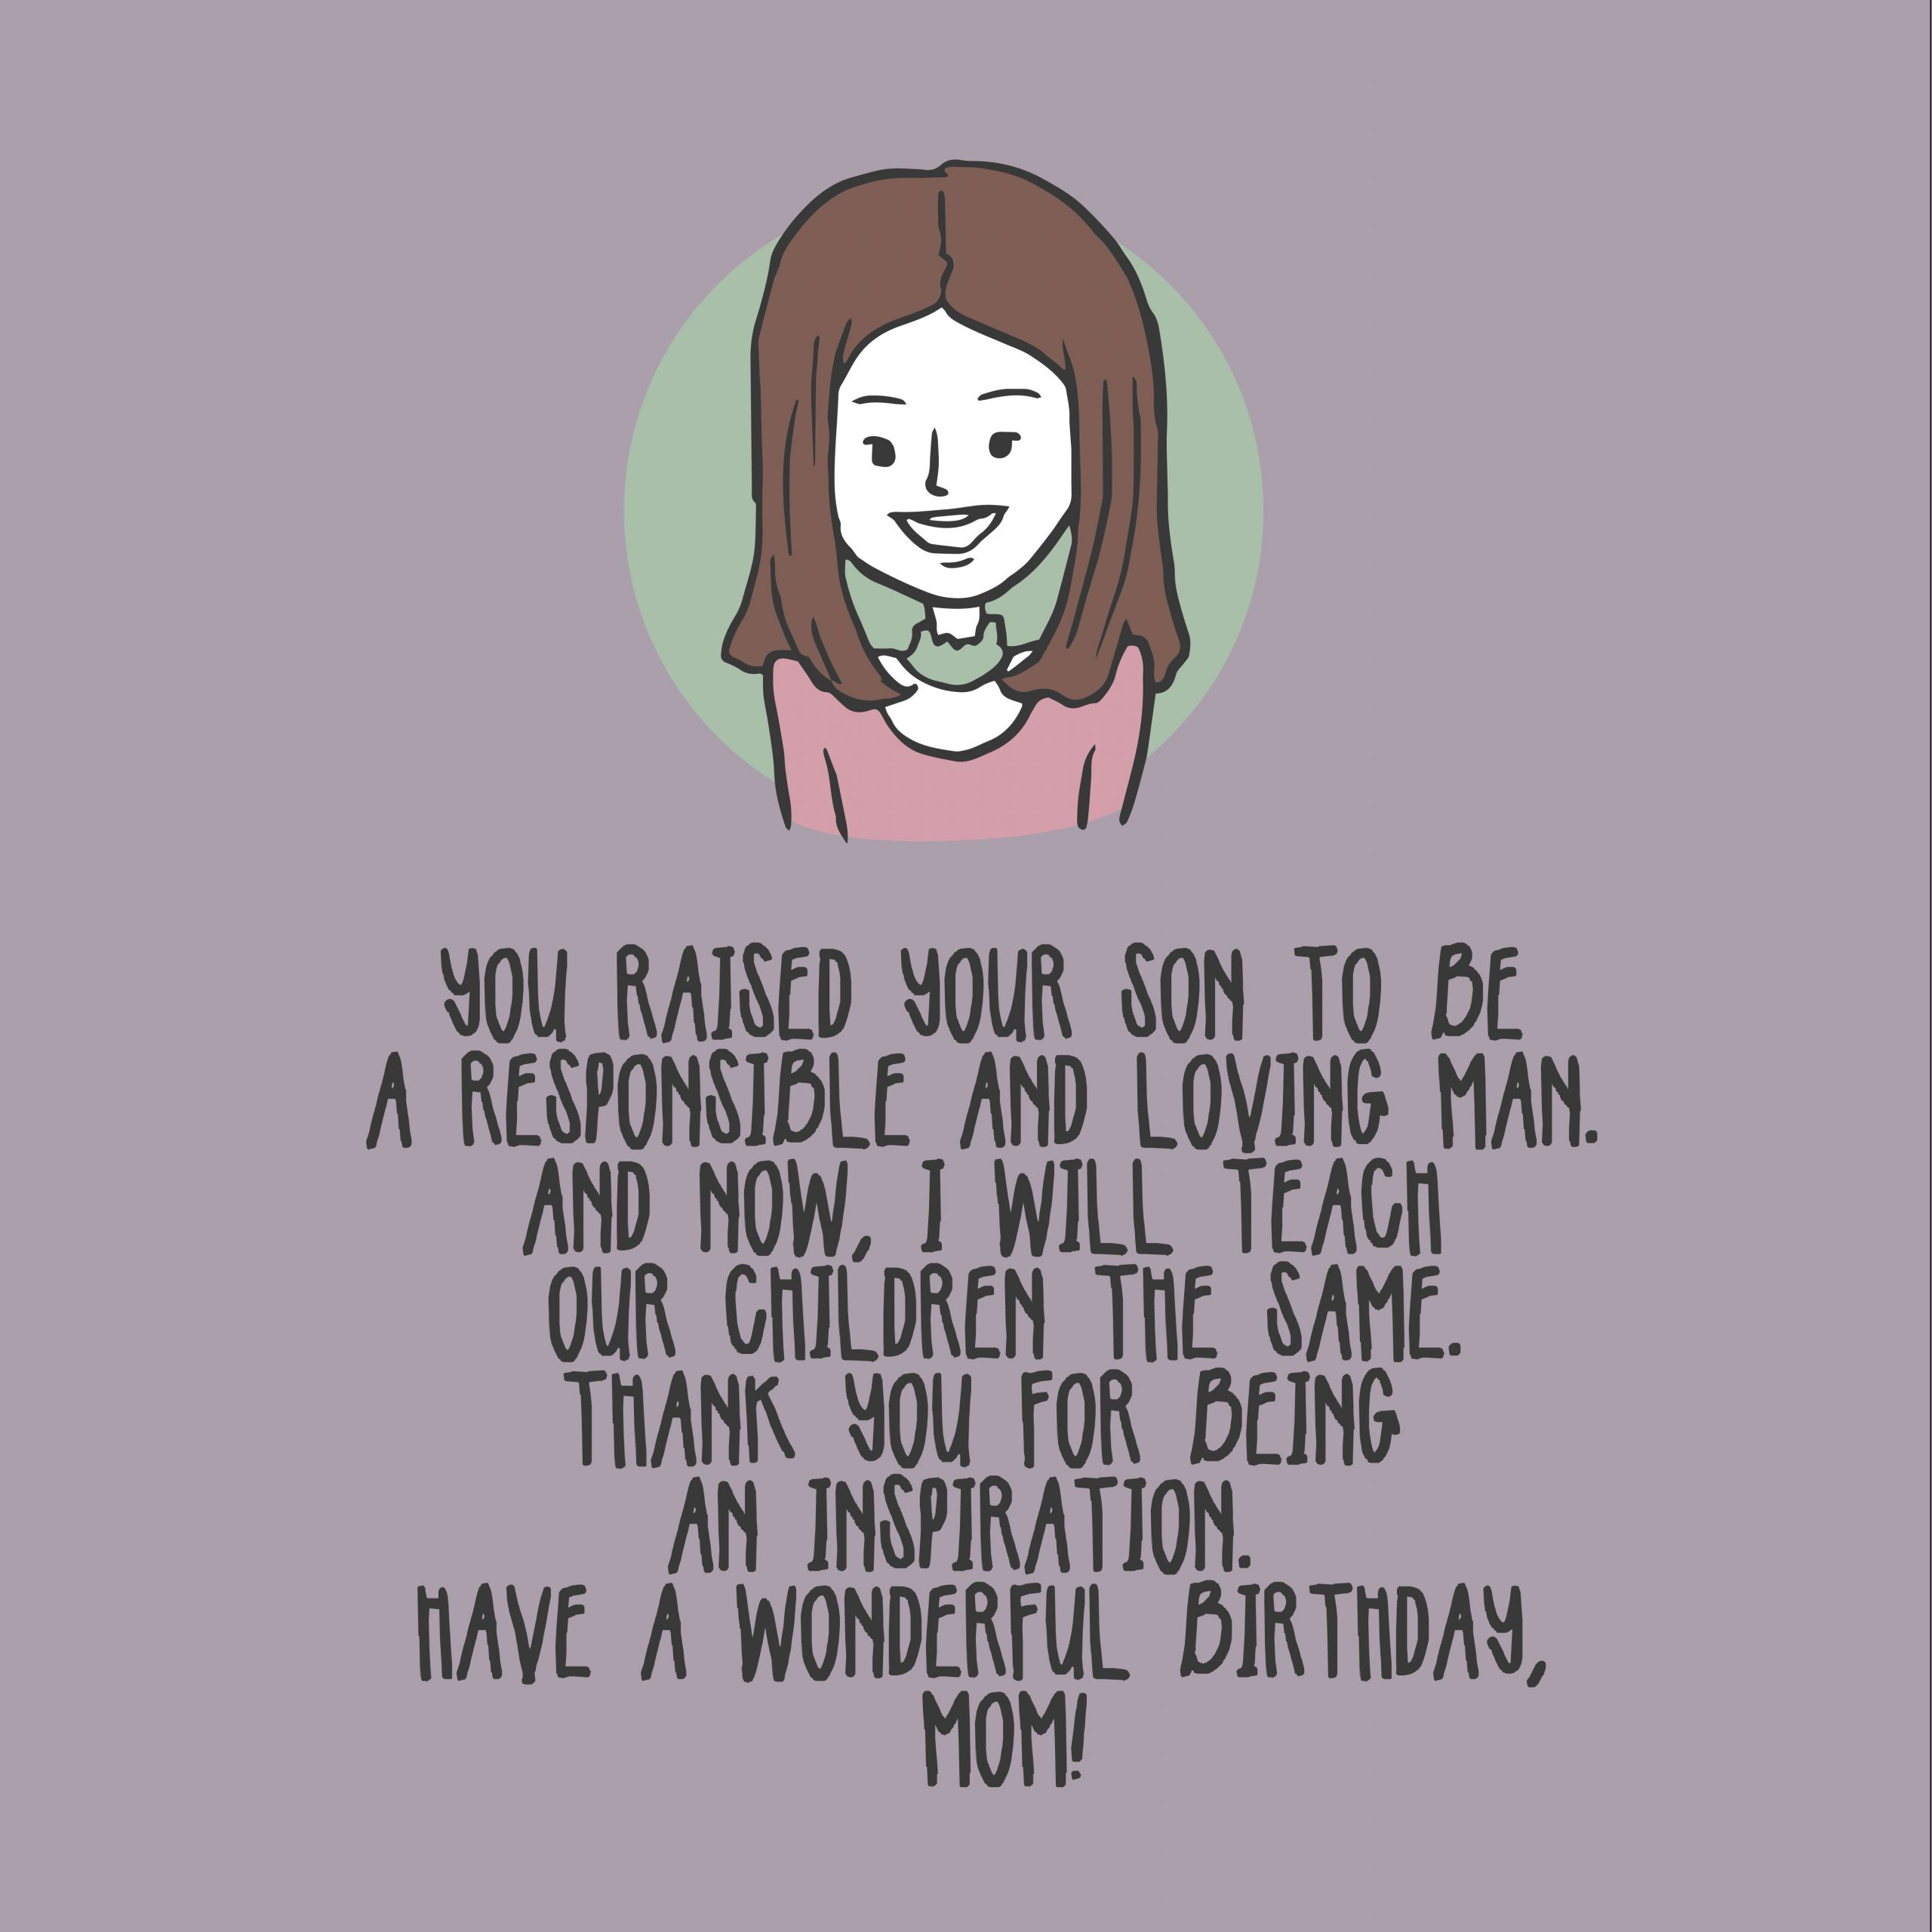 Happy Birthday Quote For Mother In Law
 The 200 Happy Birthday Mother in Law Quotes Top Happy